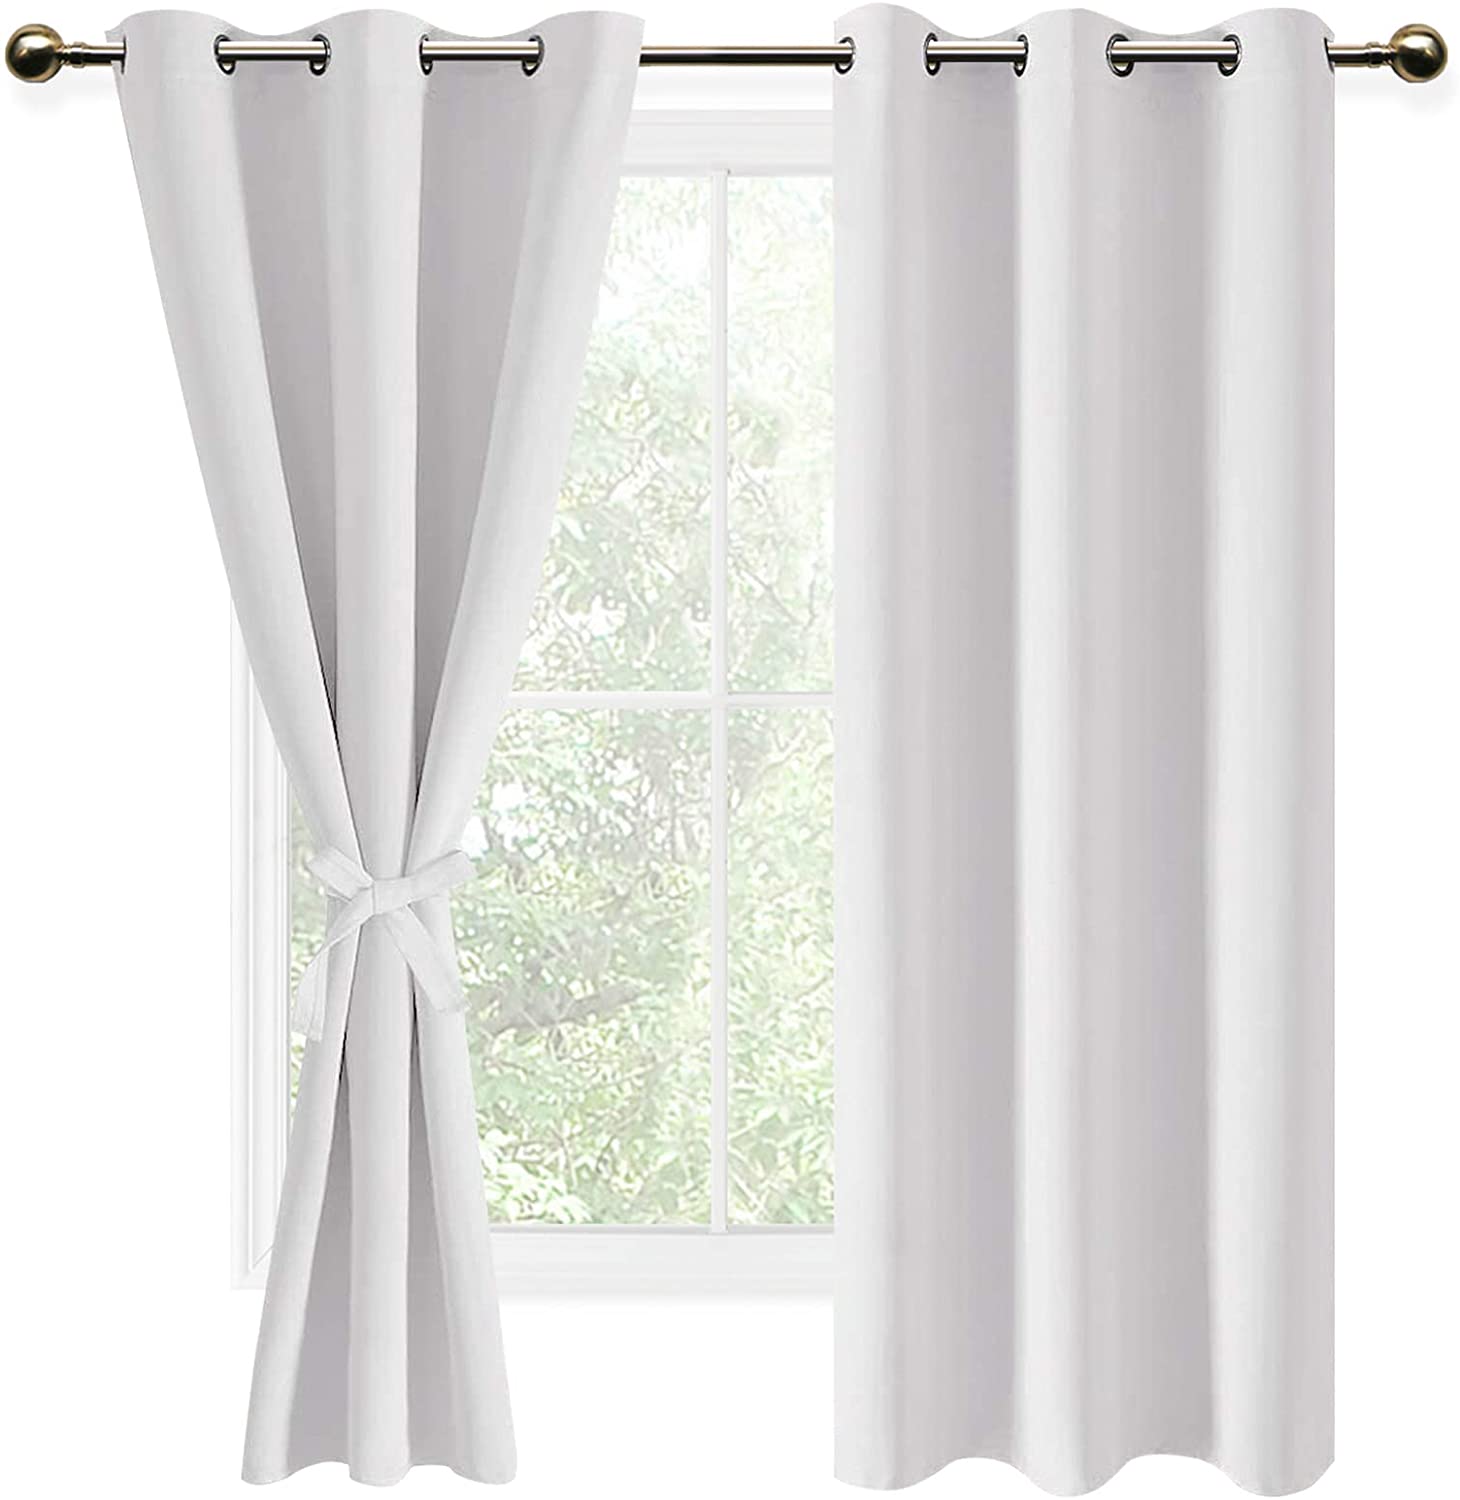 IBAOLEA Blackout Curtains for Bedroom with Tiebacks Room Darkening  Privacy Grommet Top Window Curtains for Living Room, 42 x 72 inch Long,  Greyish White, Set of Panels Greyish White W42